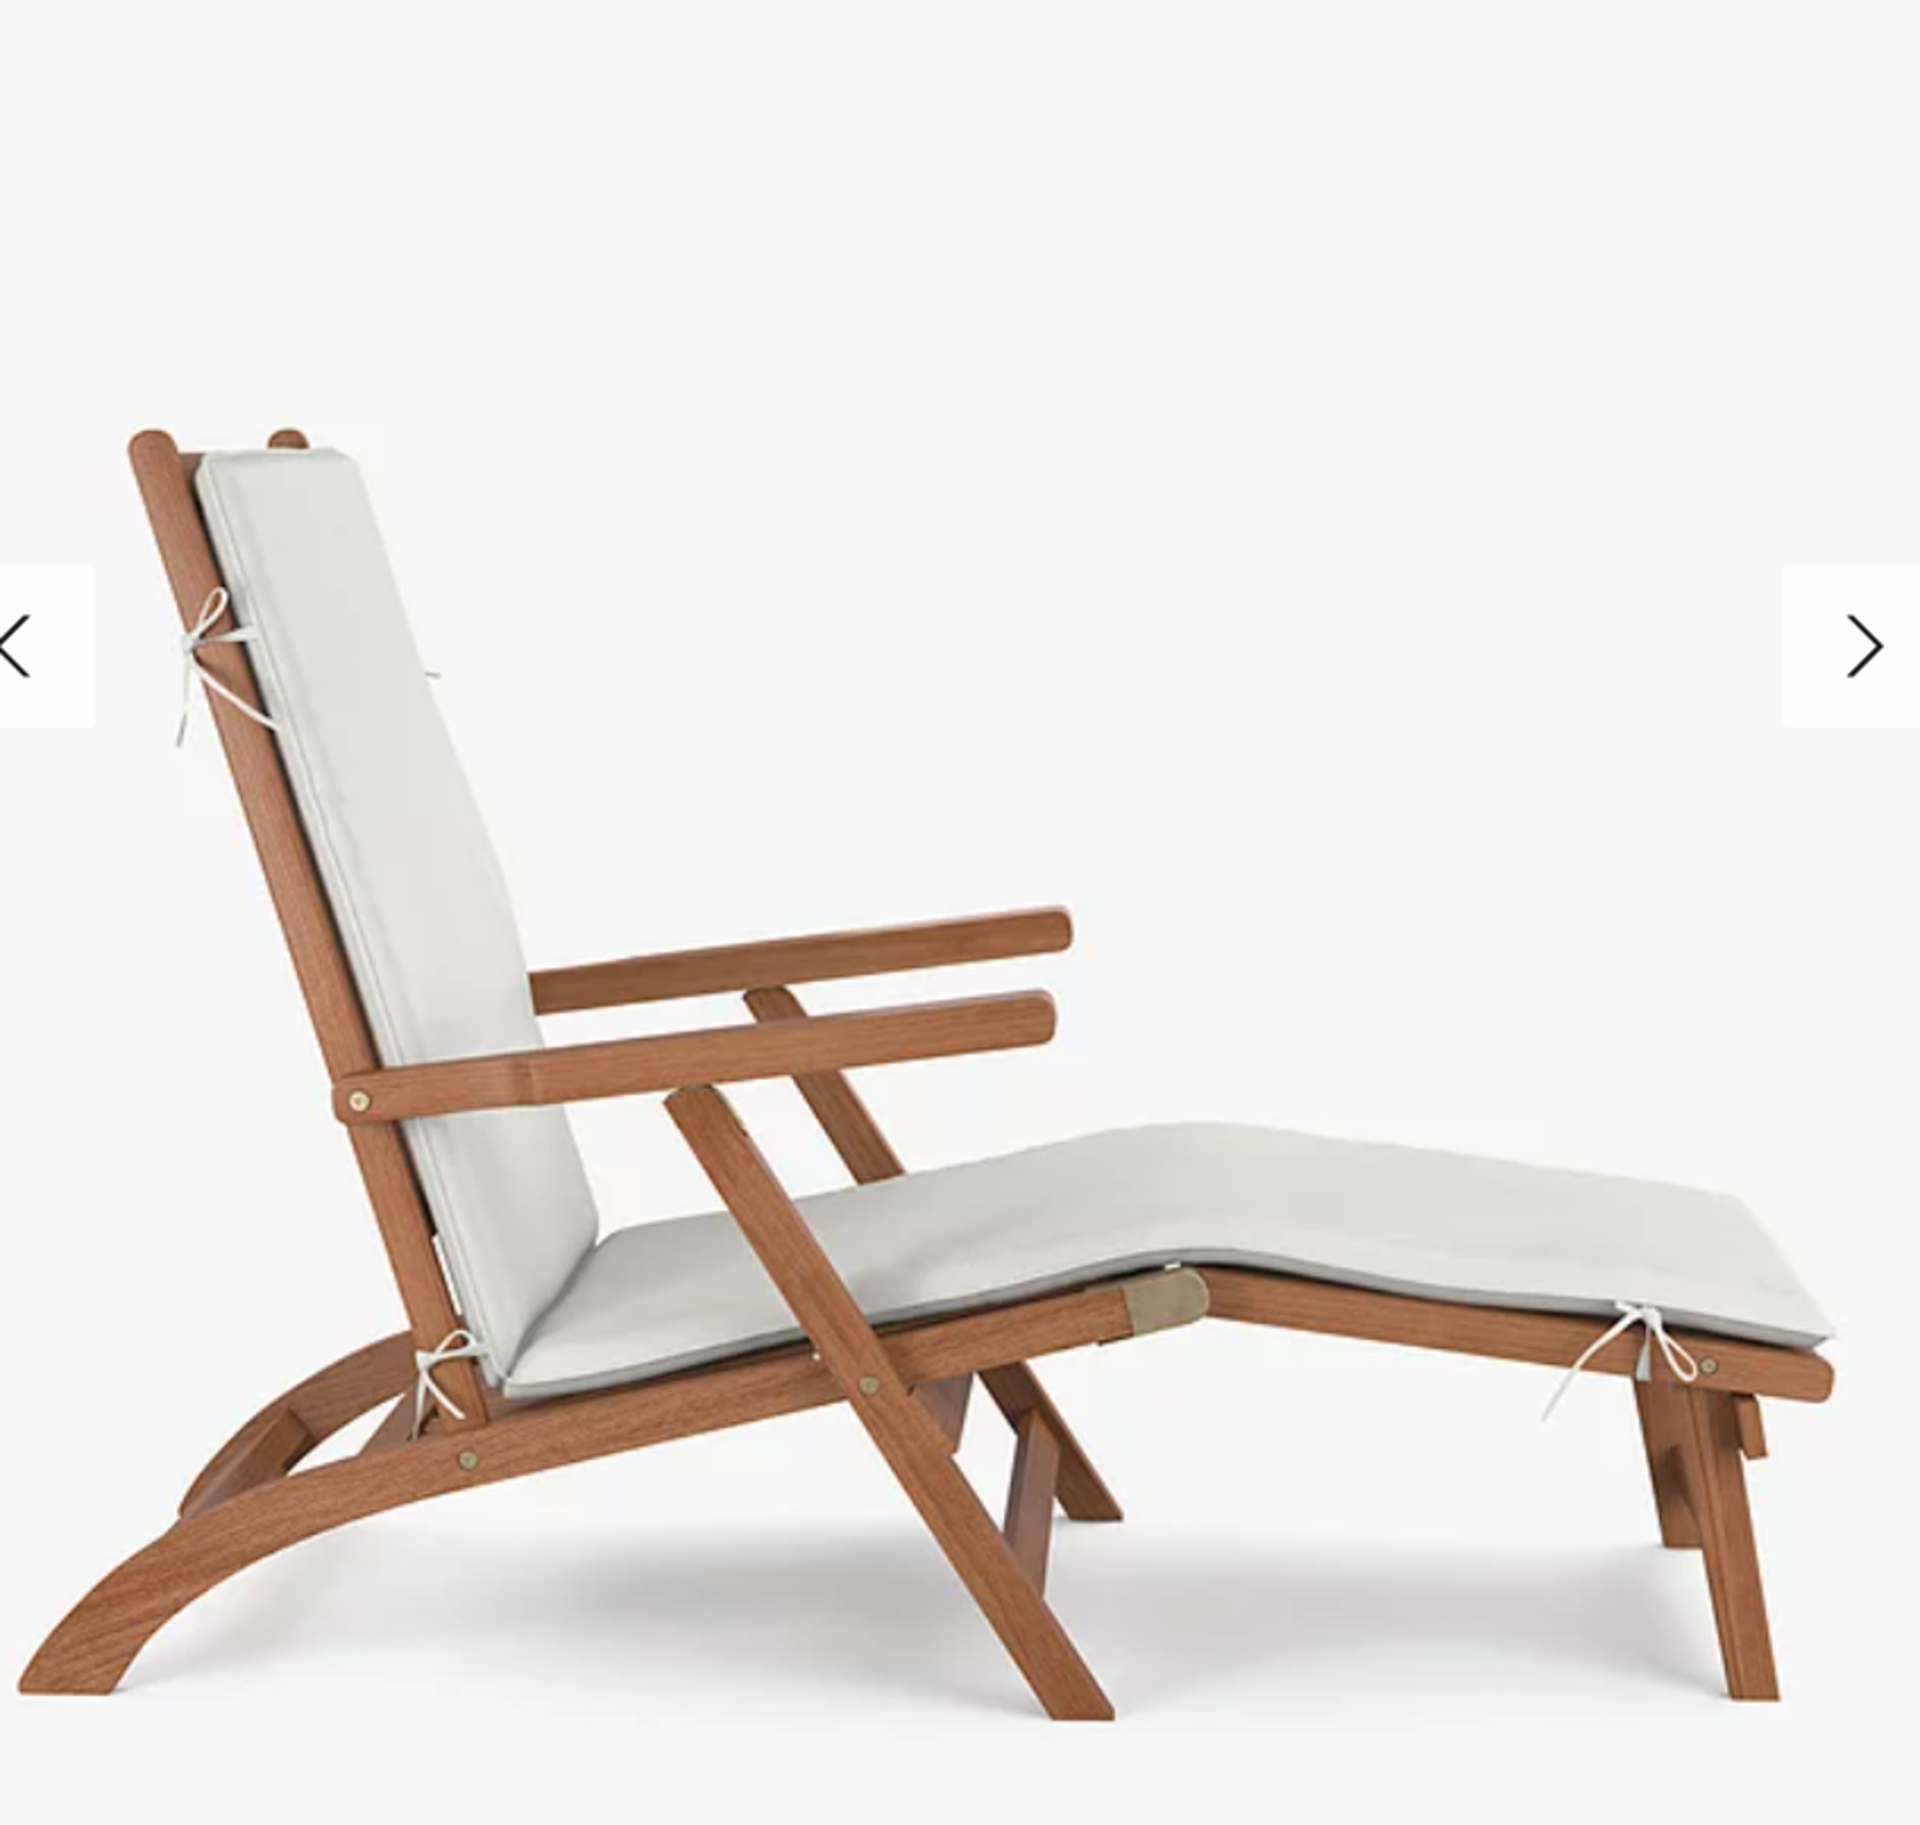 2 x New & Boxed John Lewis Cove Garden Steamer Chair, FSC-Certified (Eucalyptus Wood), Natural. - Image 2 of 5